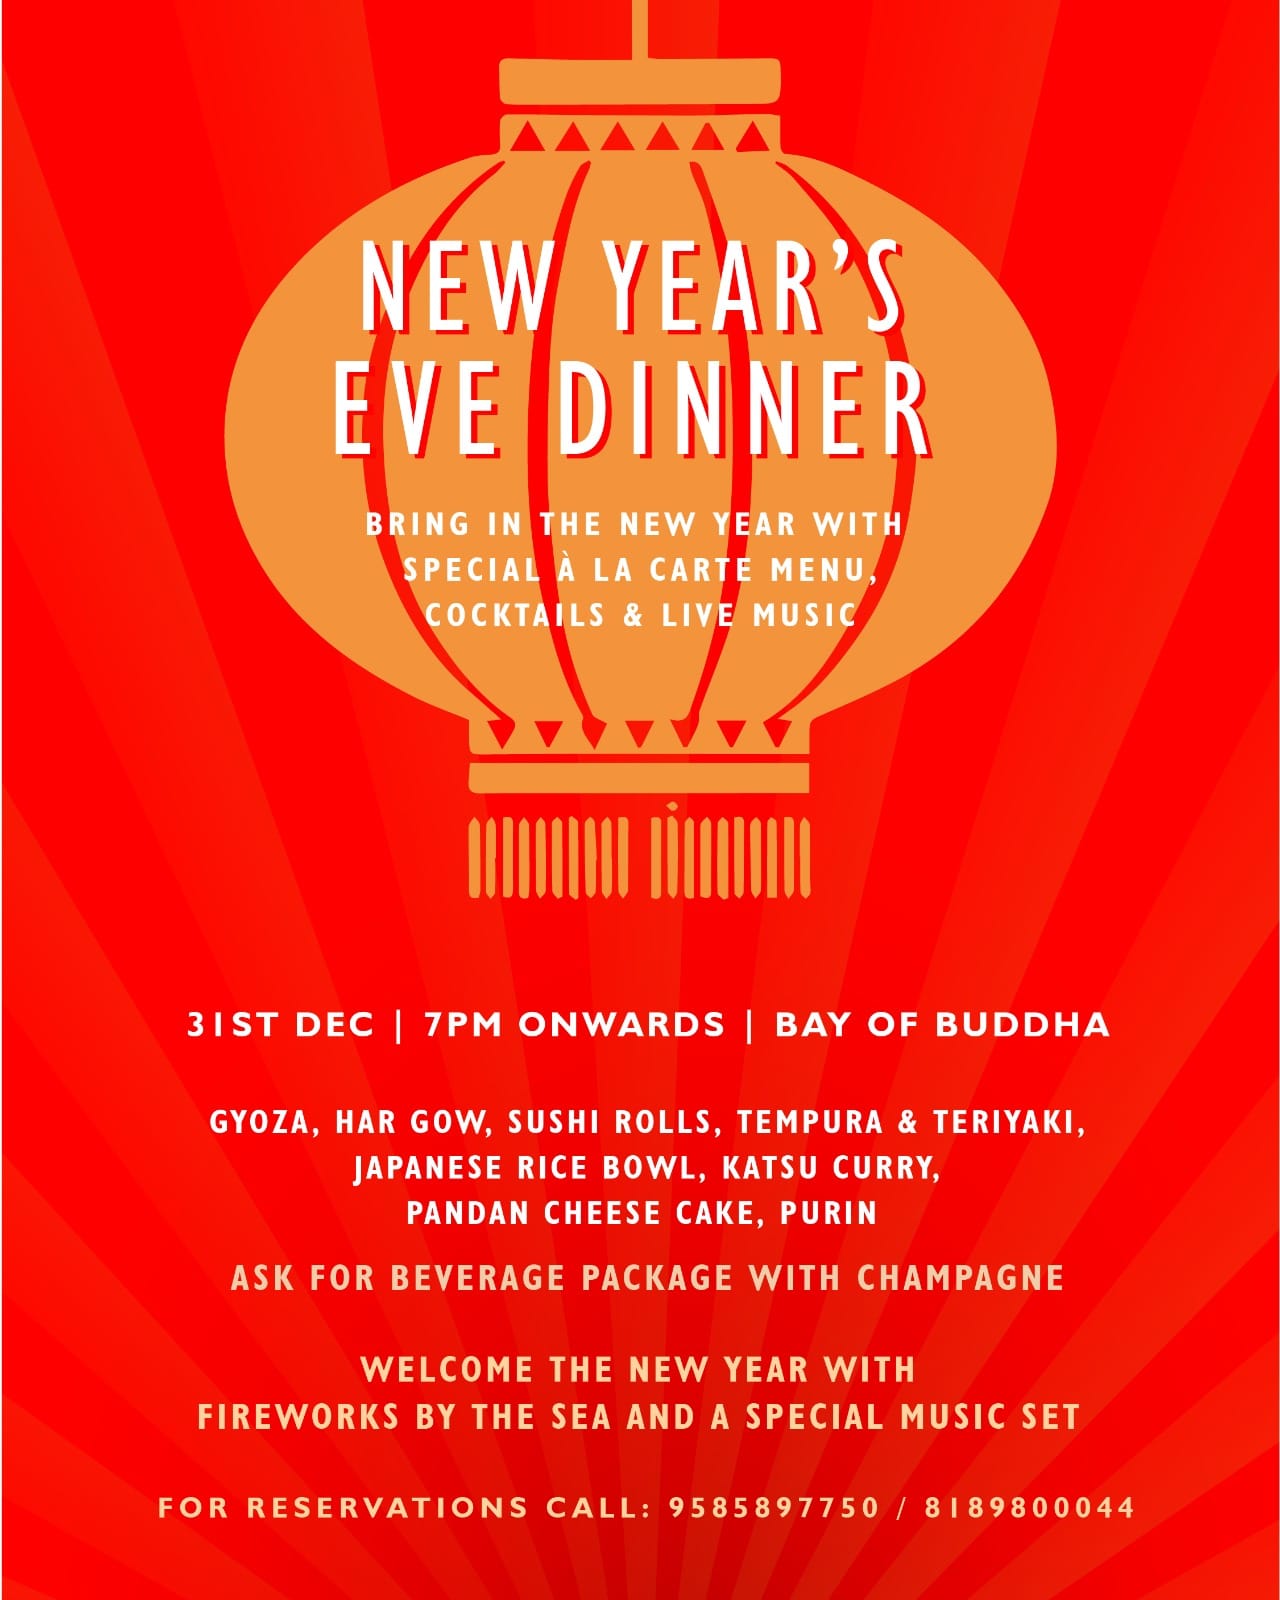 New Year's Eve dinner at Bay of Buddha